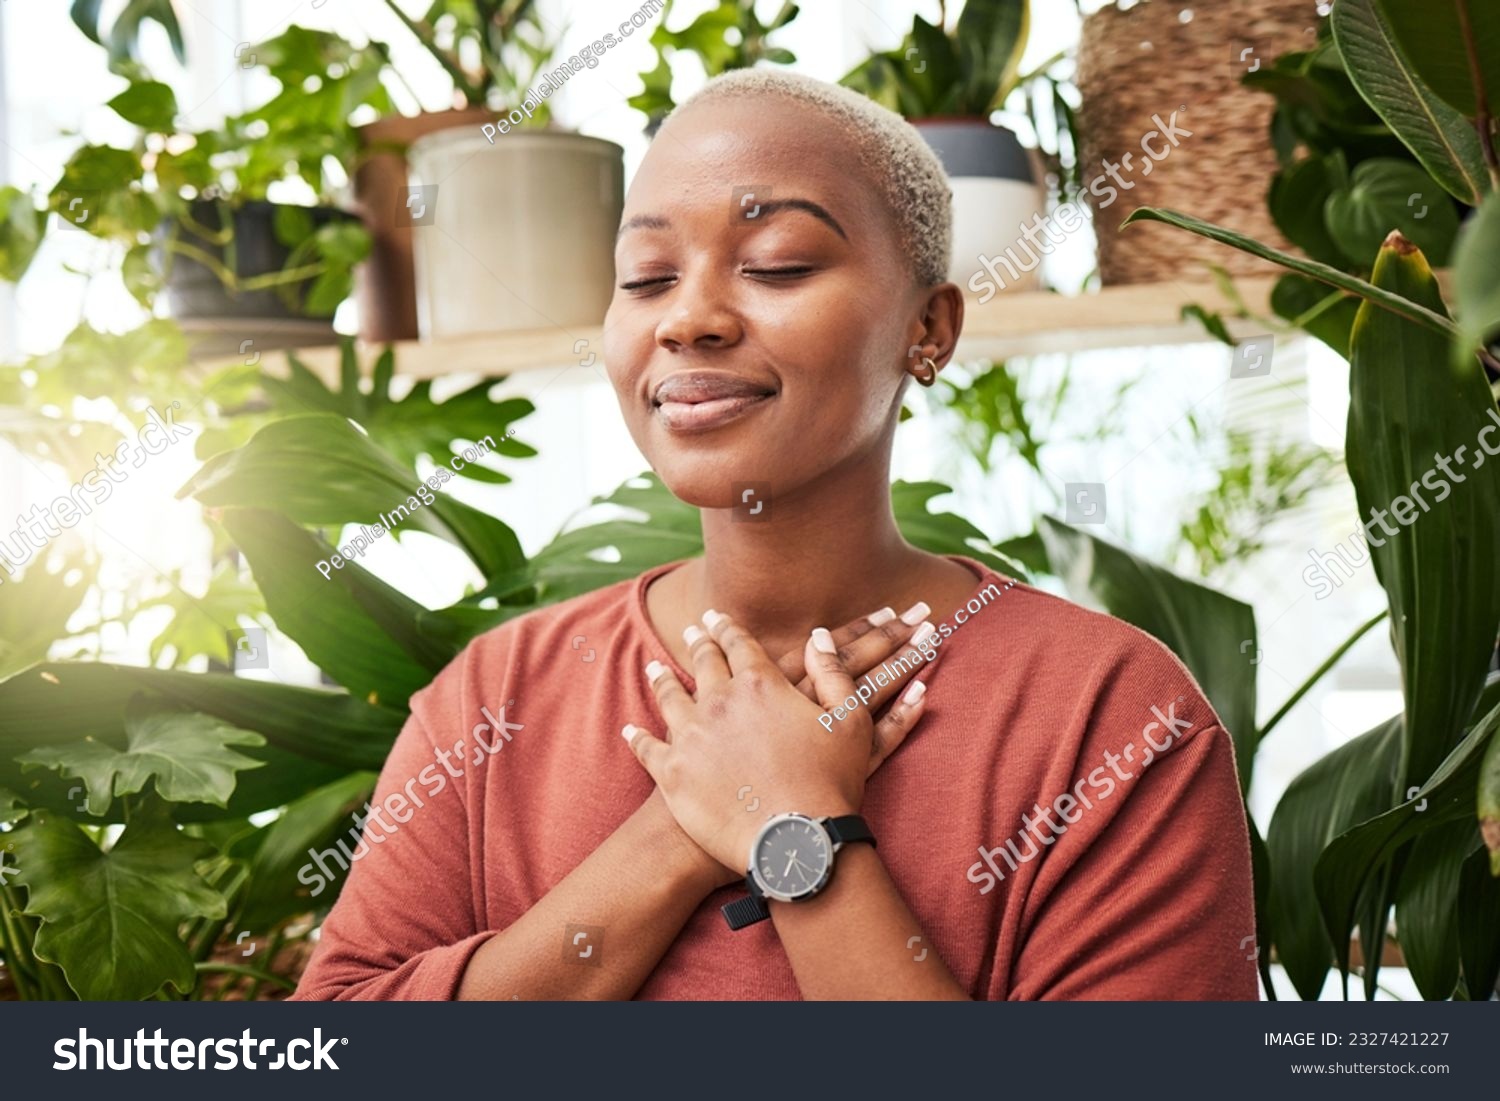 Balance, breathing and young woman by plants for zen meditation in a greenery nursery. Breathe, gratitude and young African female person with a relaxing peace mindset by an indoor greenhouse garden. #2327421227